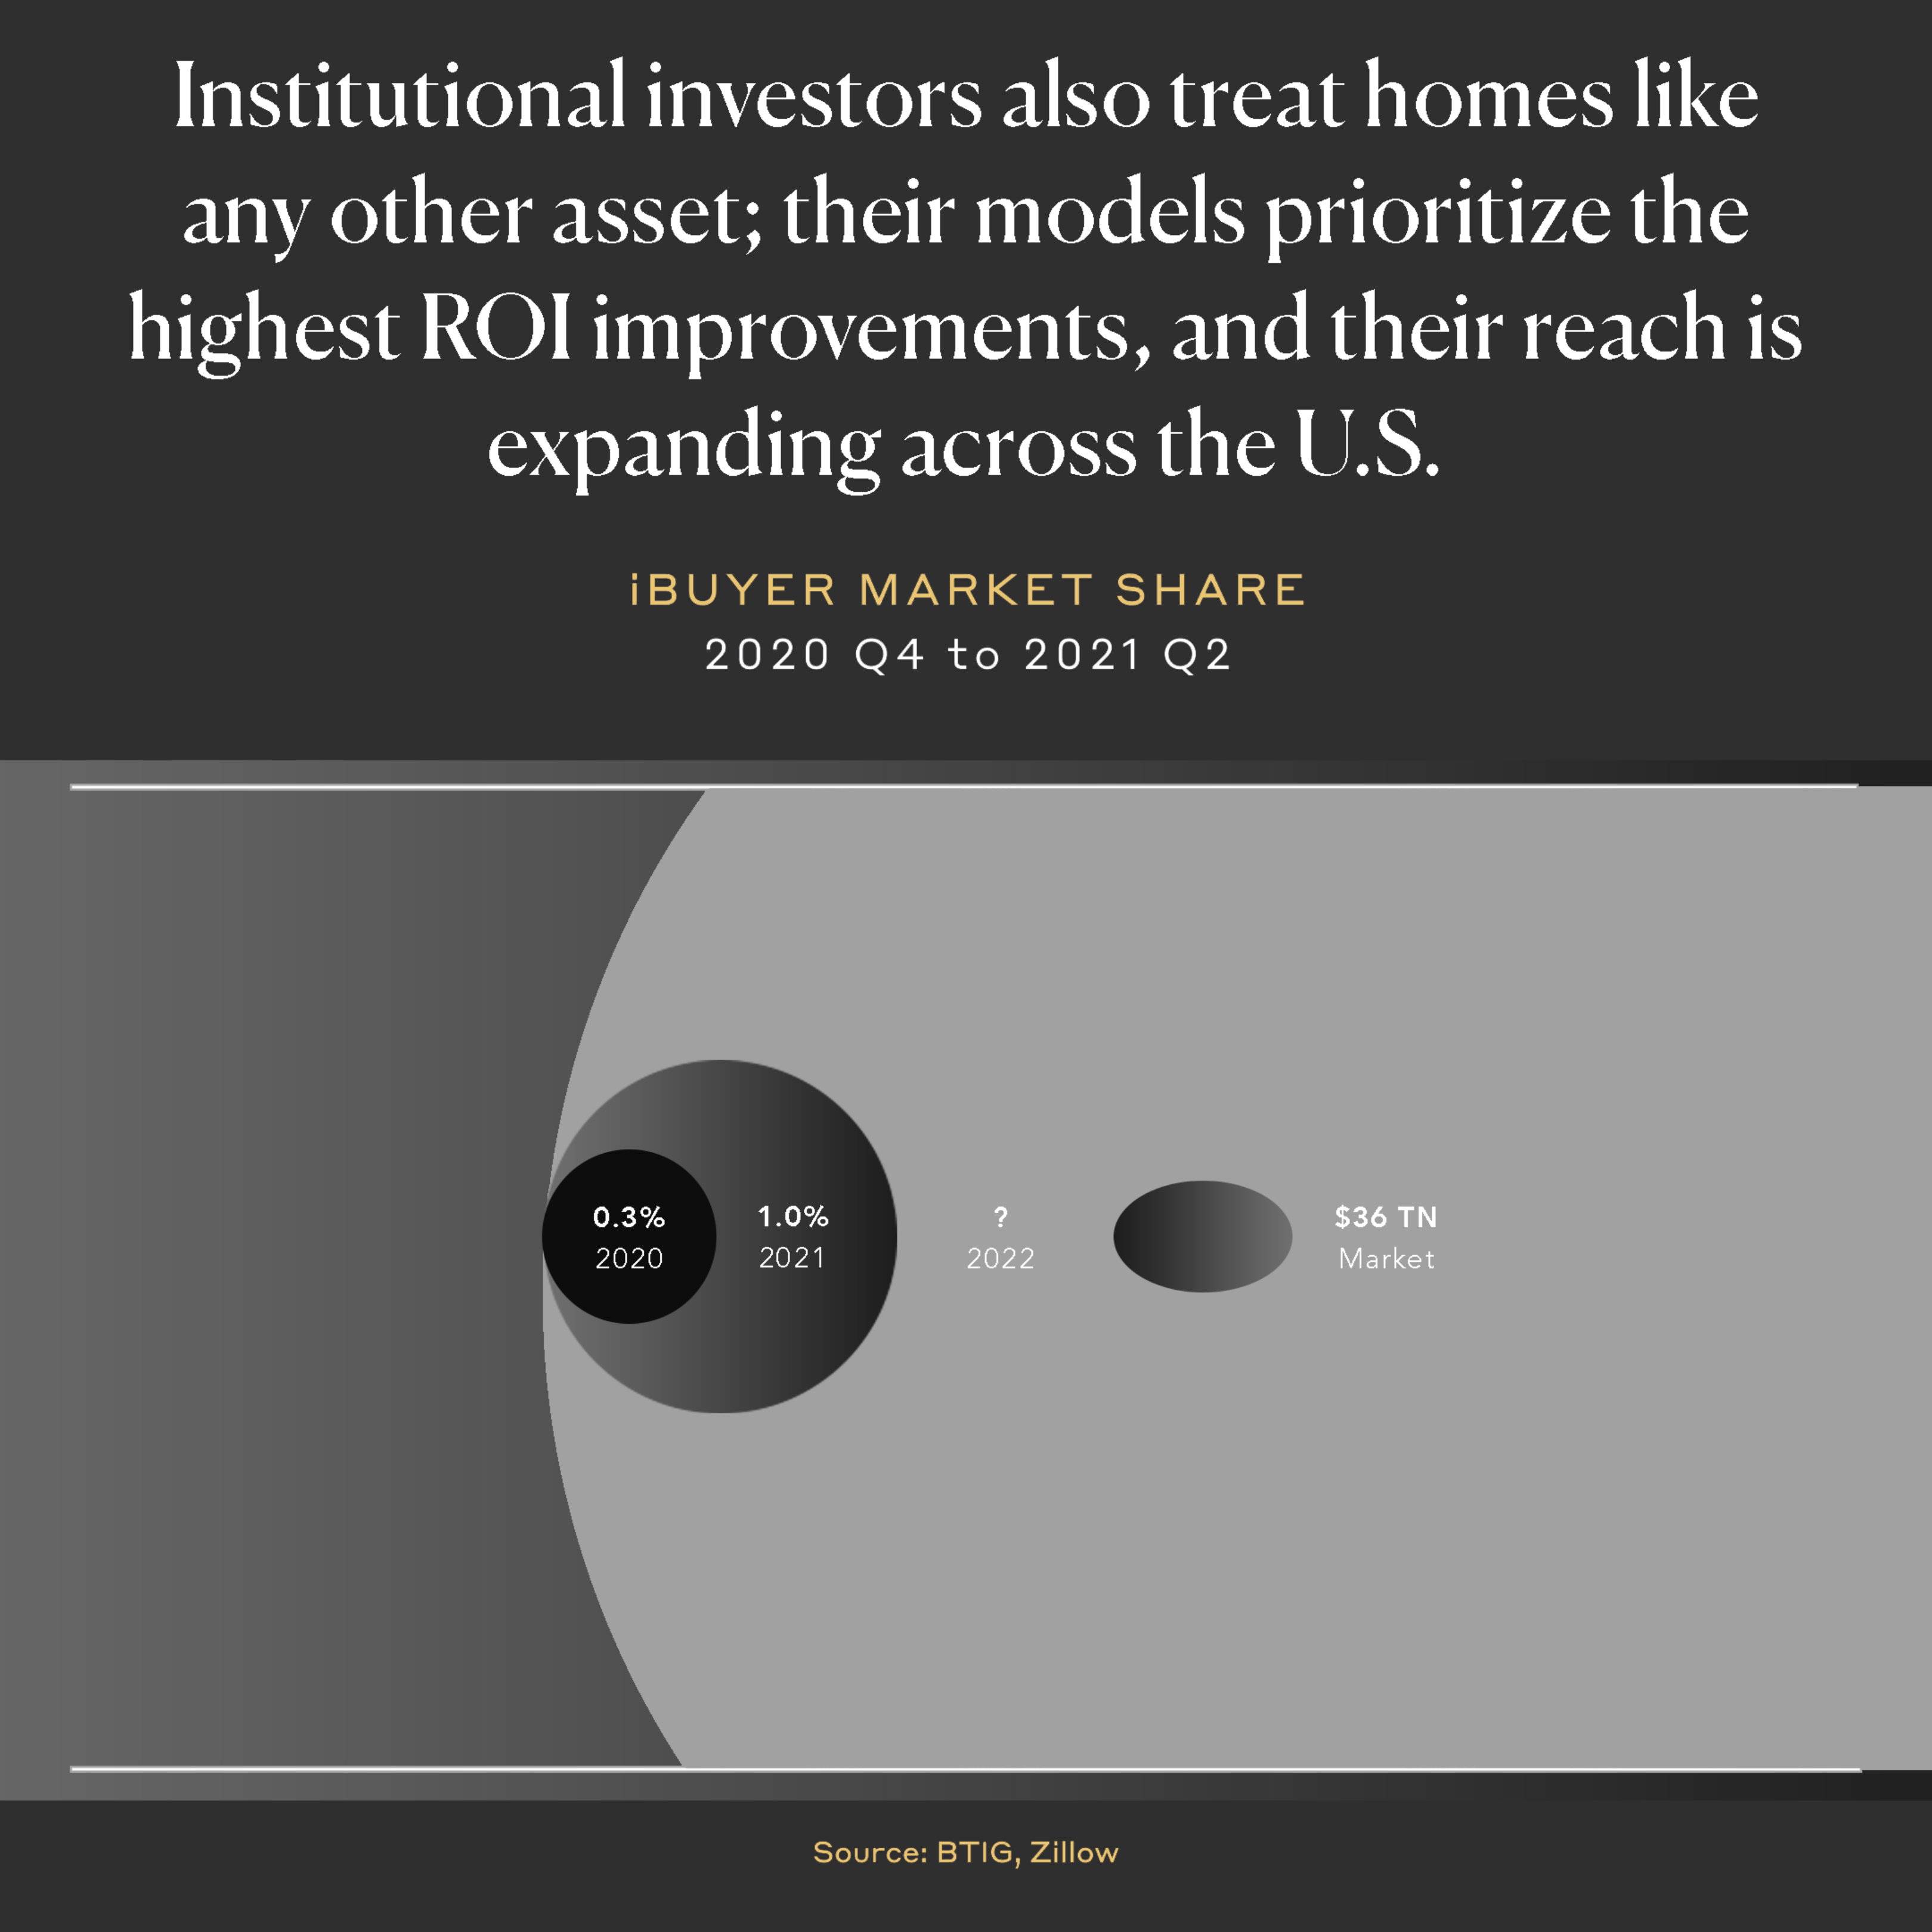 Institutional investors also treat homes like any other asset; their models prioritize the highest ROI improvements, and their reach is expanding across the U.S.